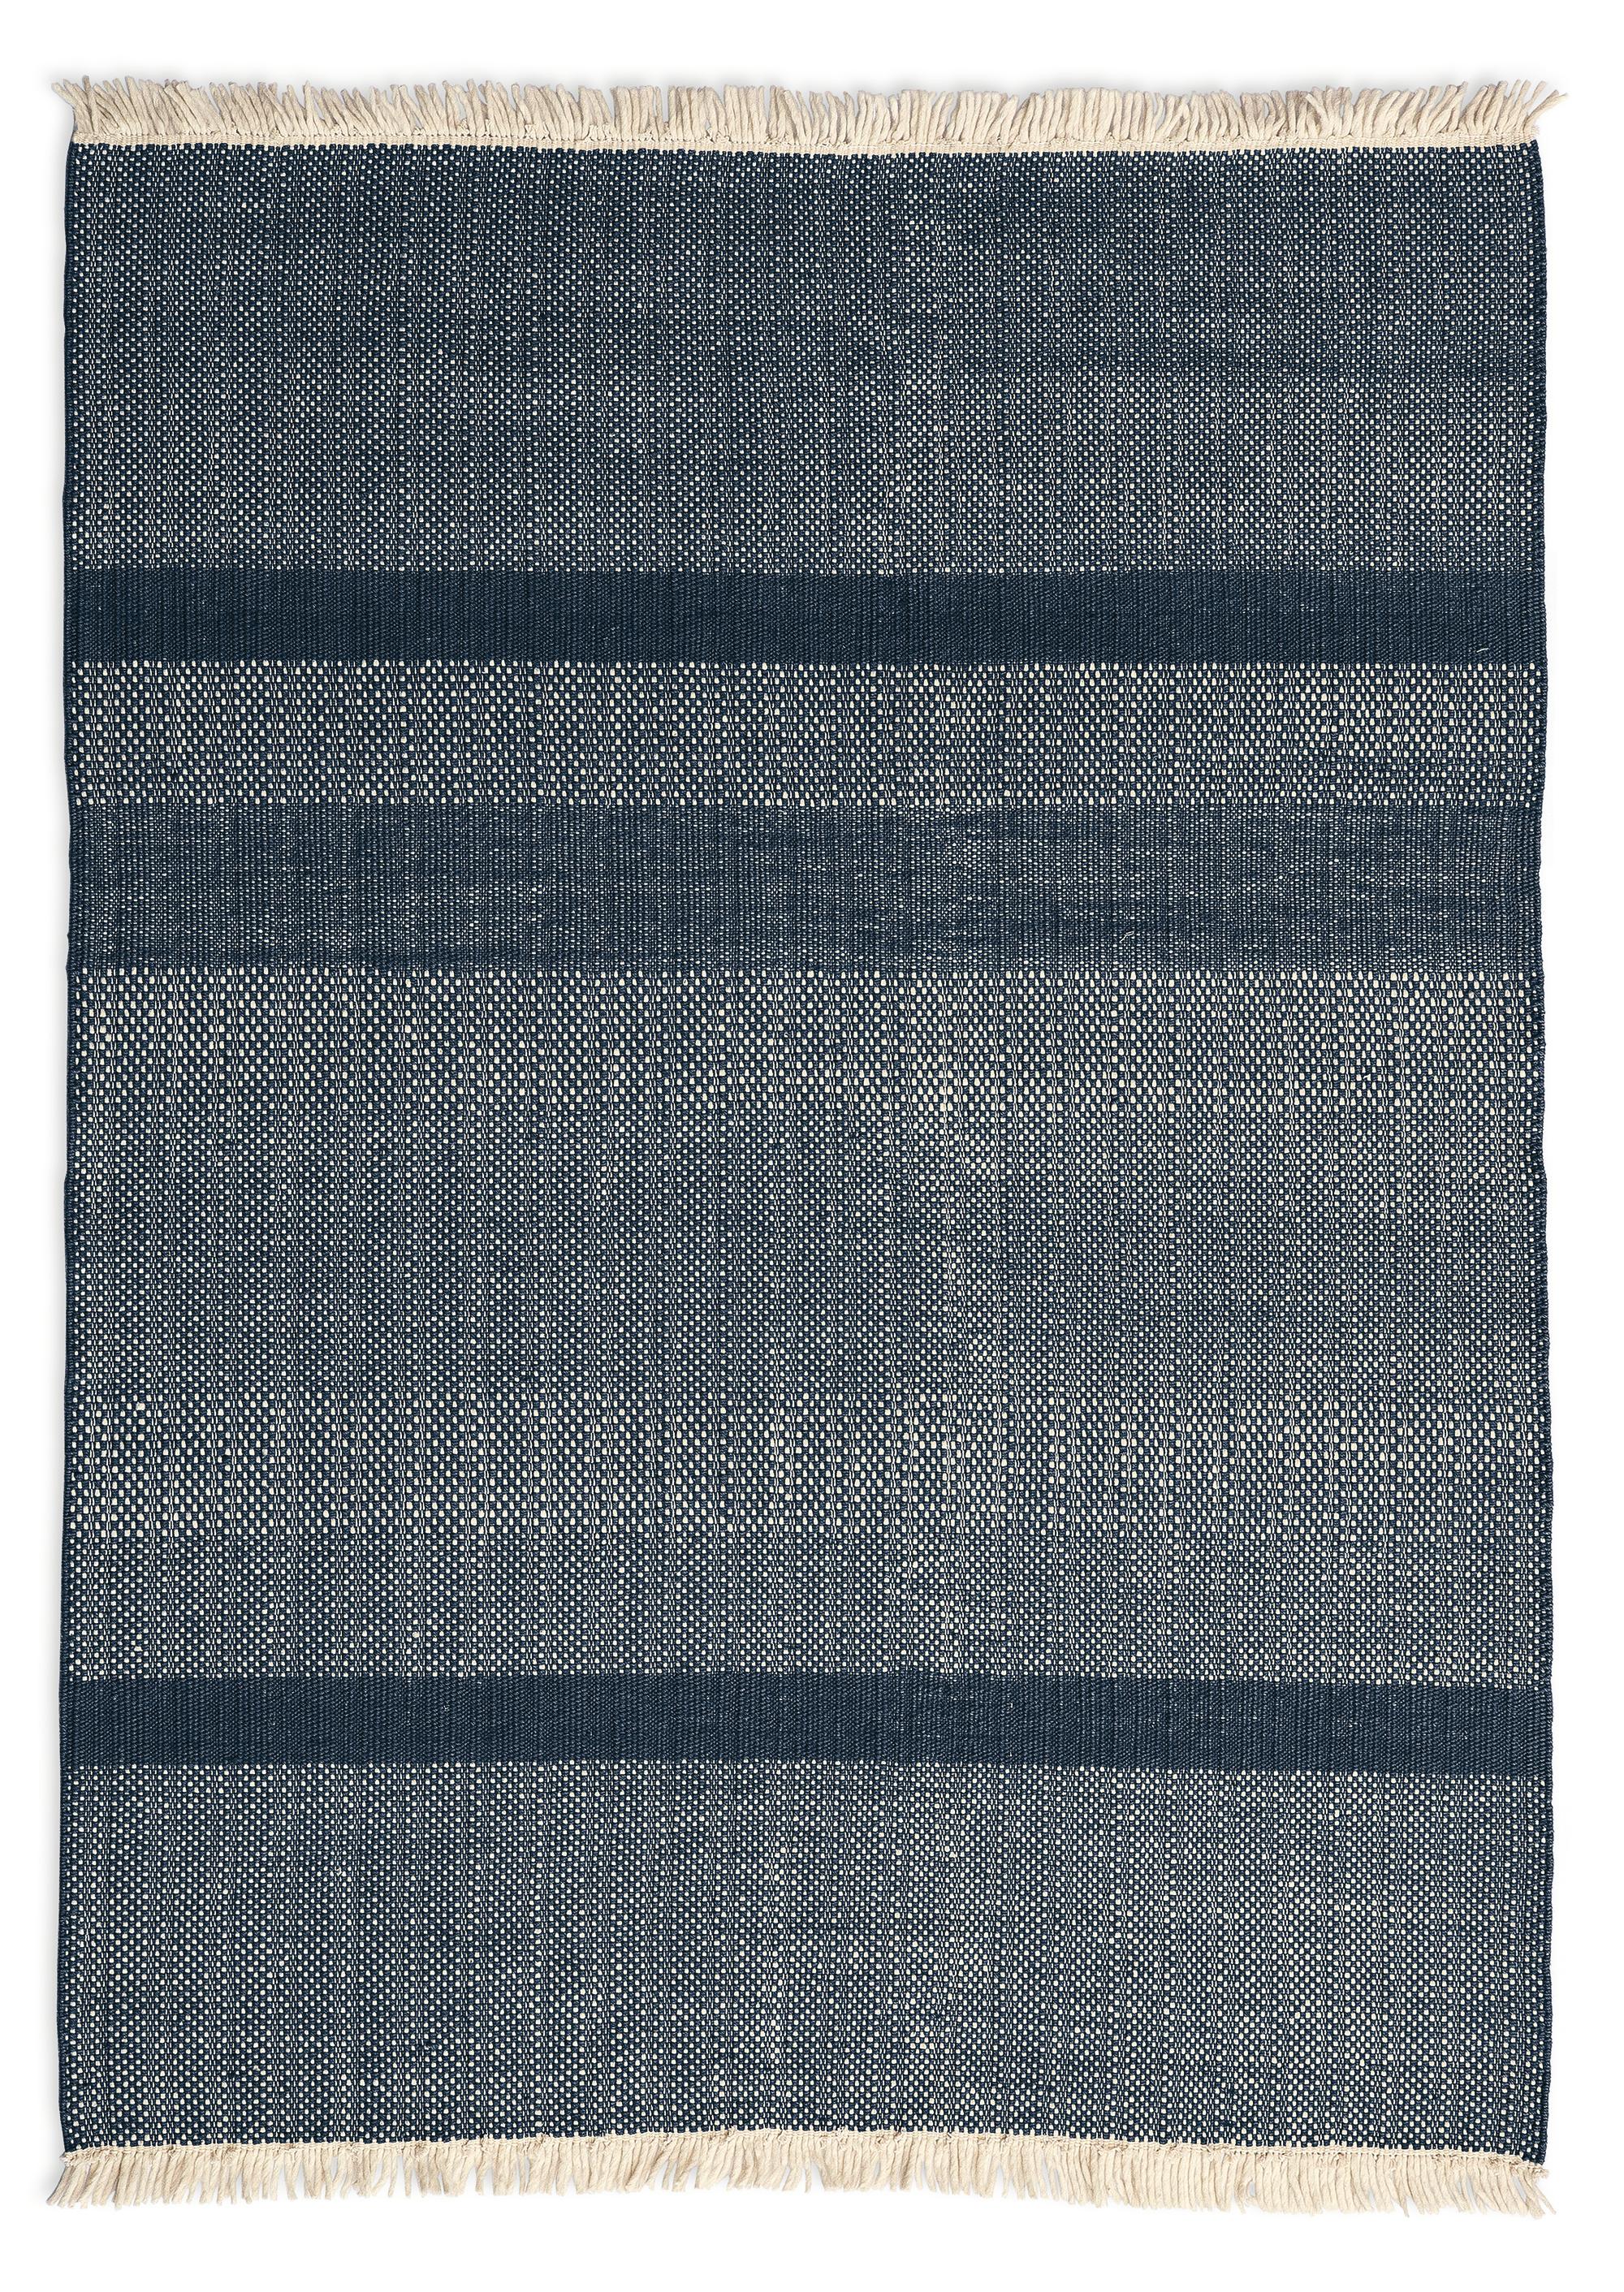 Wool Large 'Tres Texture' Hand-Loomed Rug for Nanimarquina For Sale